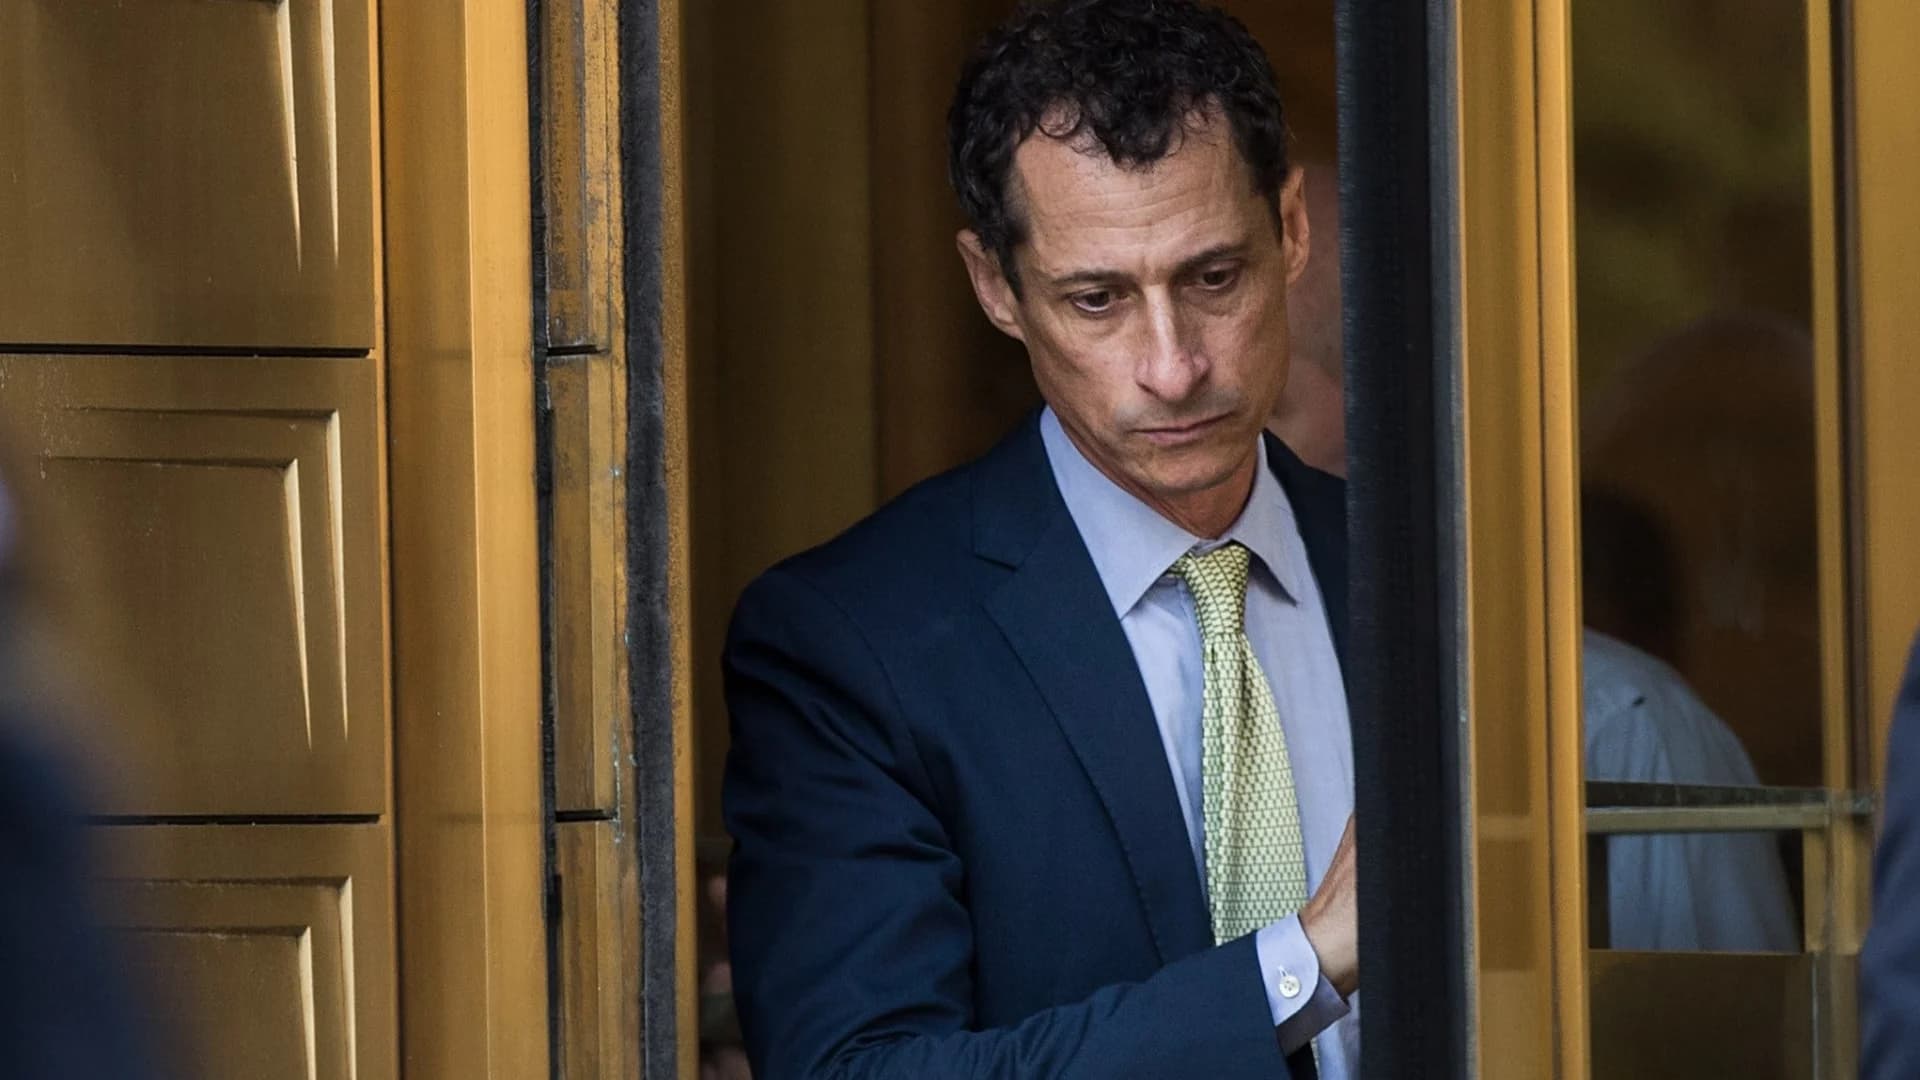 Disgraced ex-Rep. Anthony Weiner released from prison